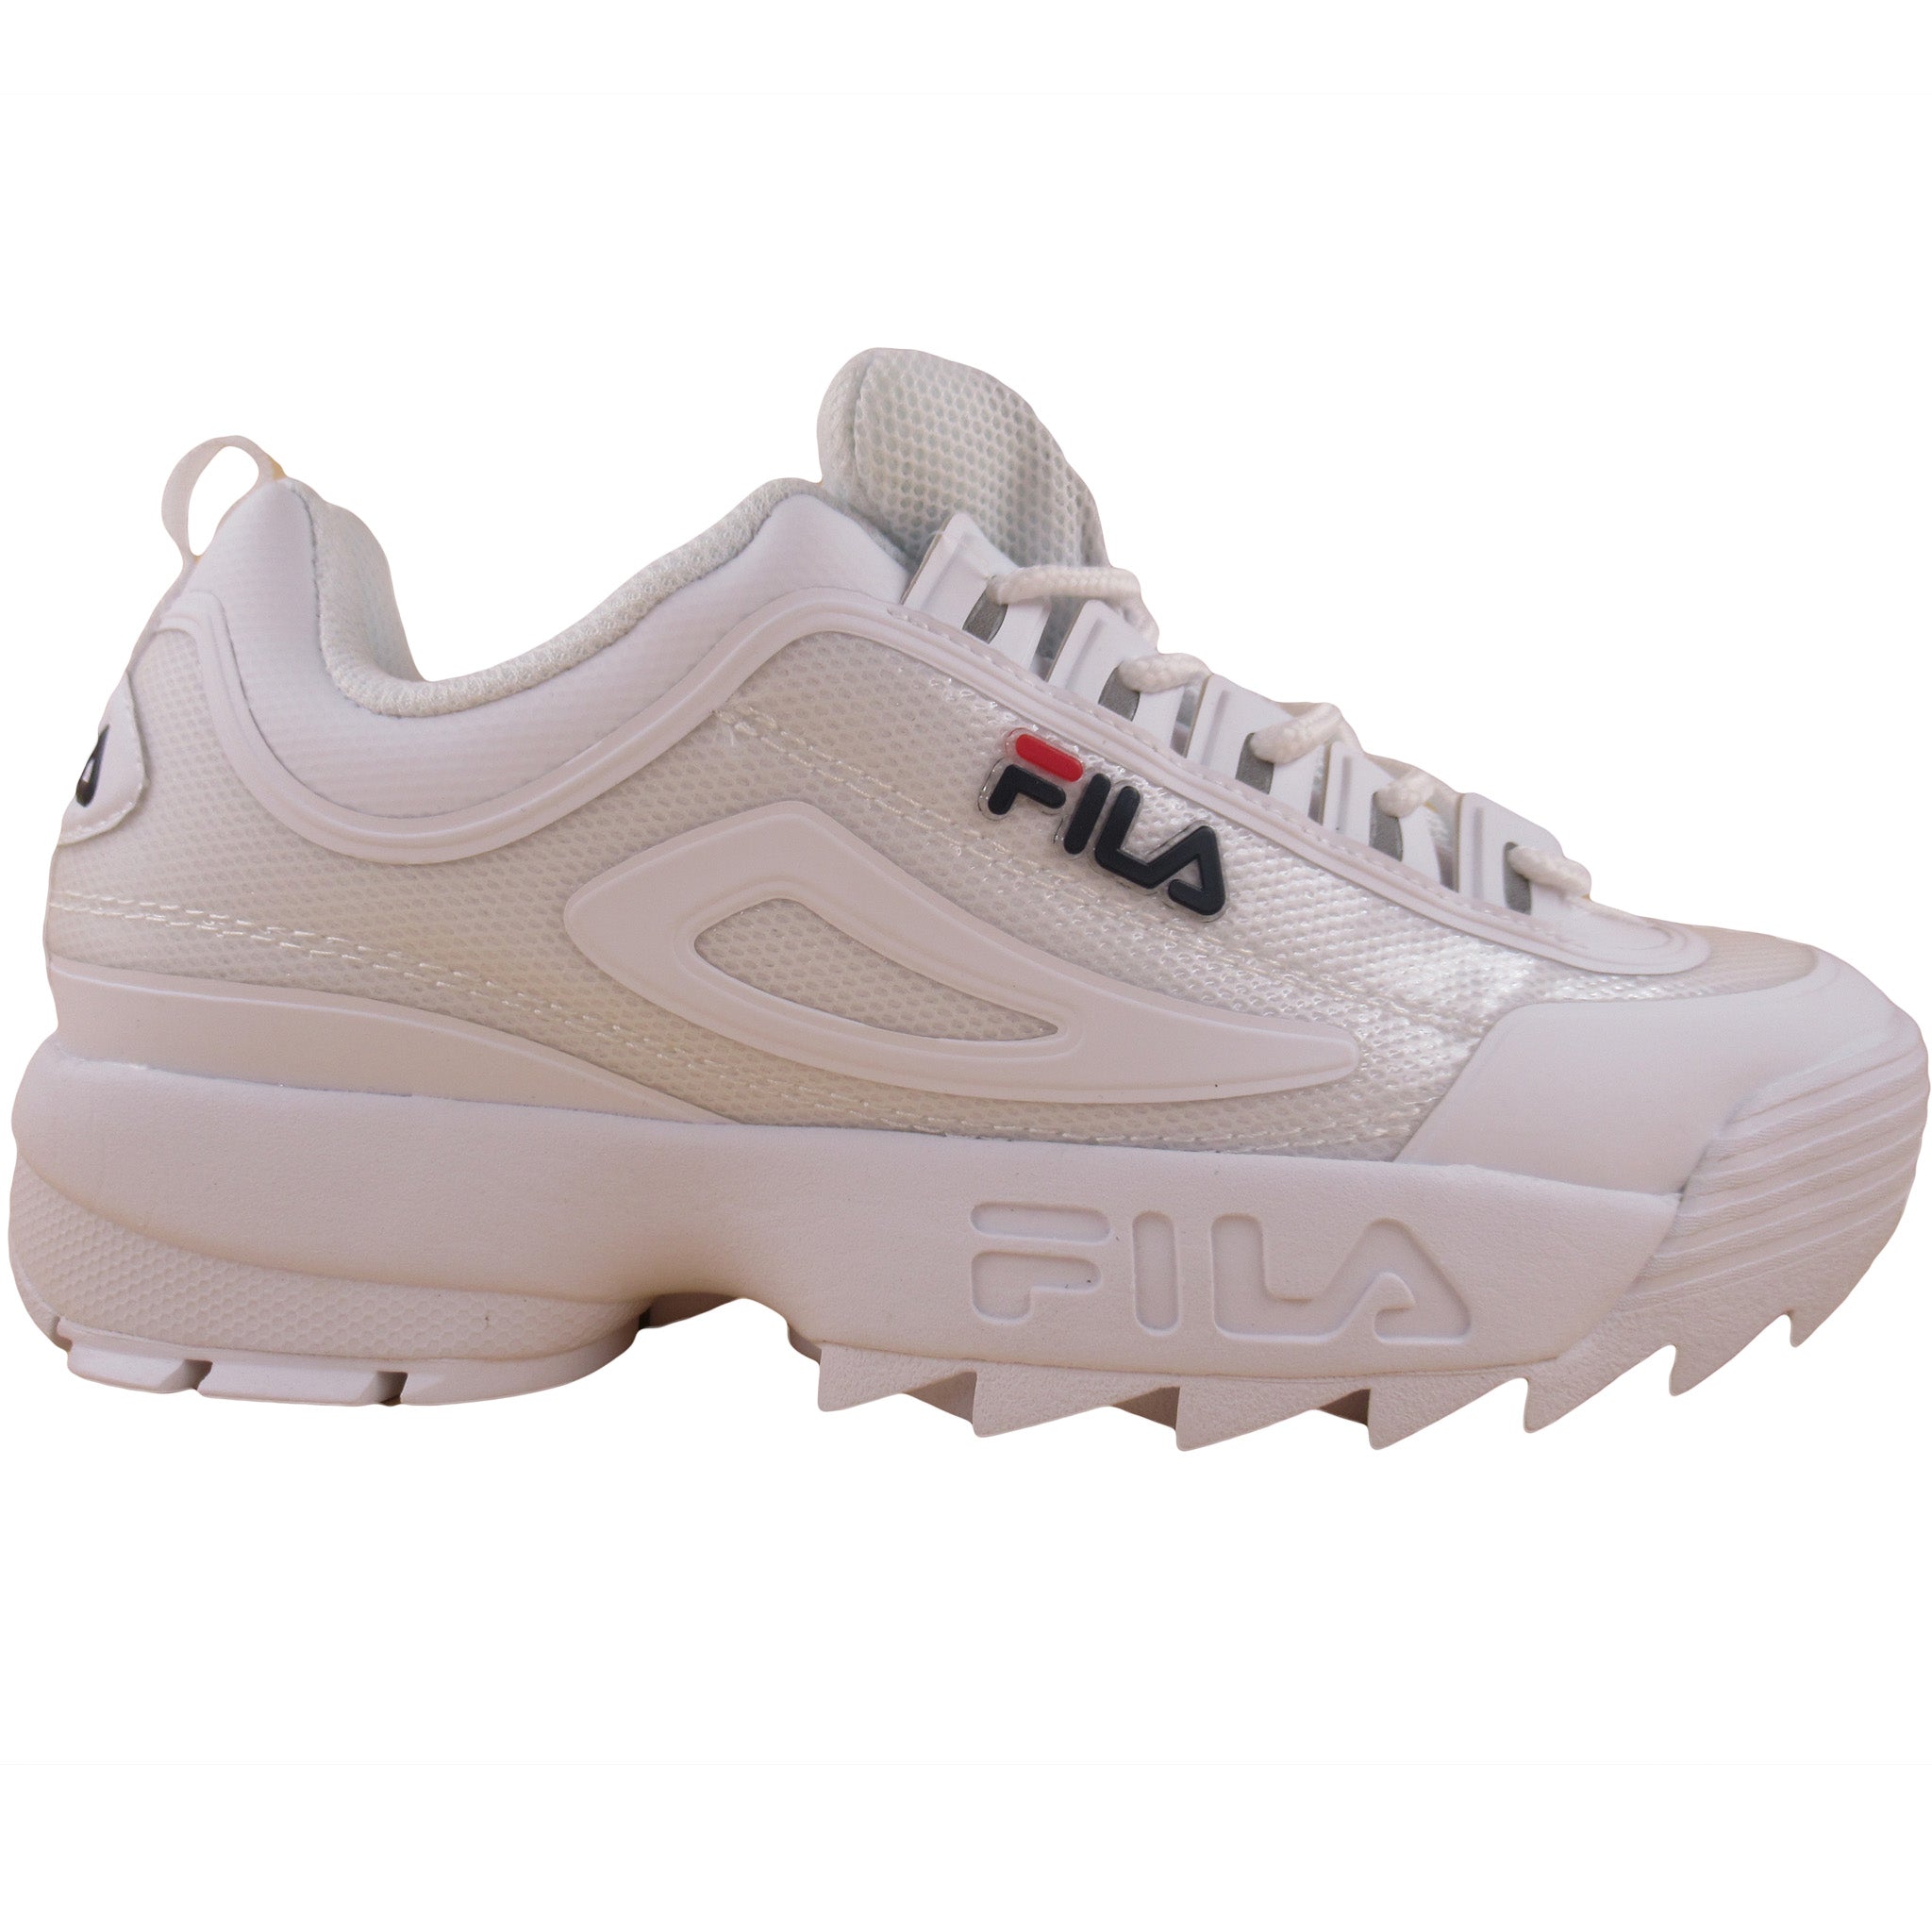 Fila Men's Disruptor II No-Sew Fashion Sneakers – That Shoe Store and More